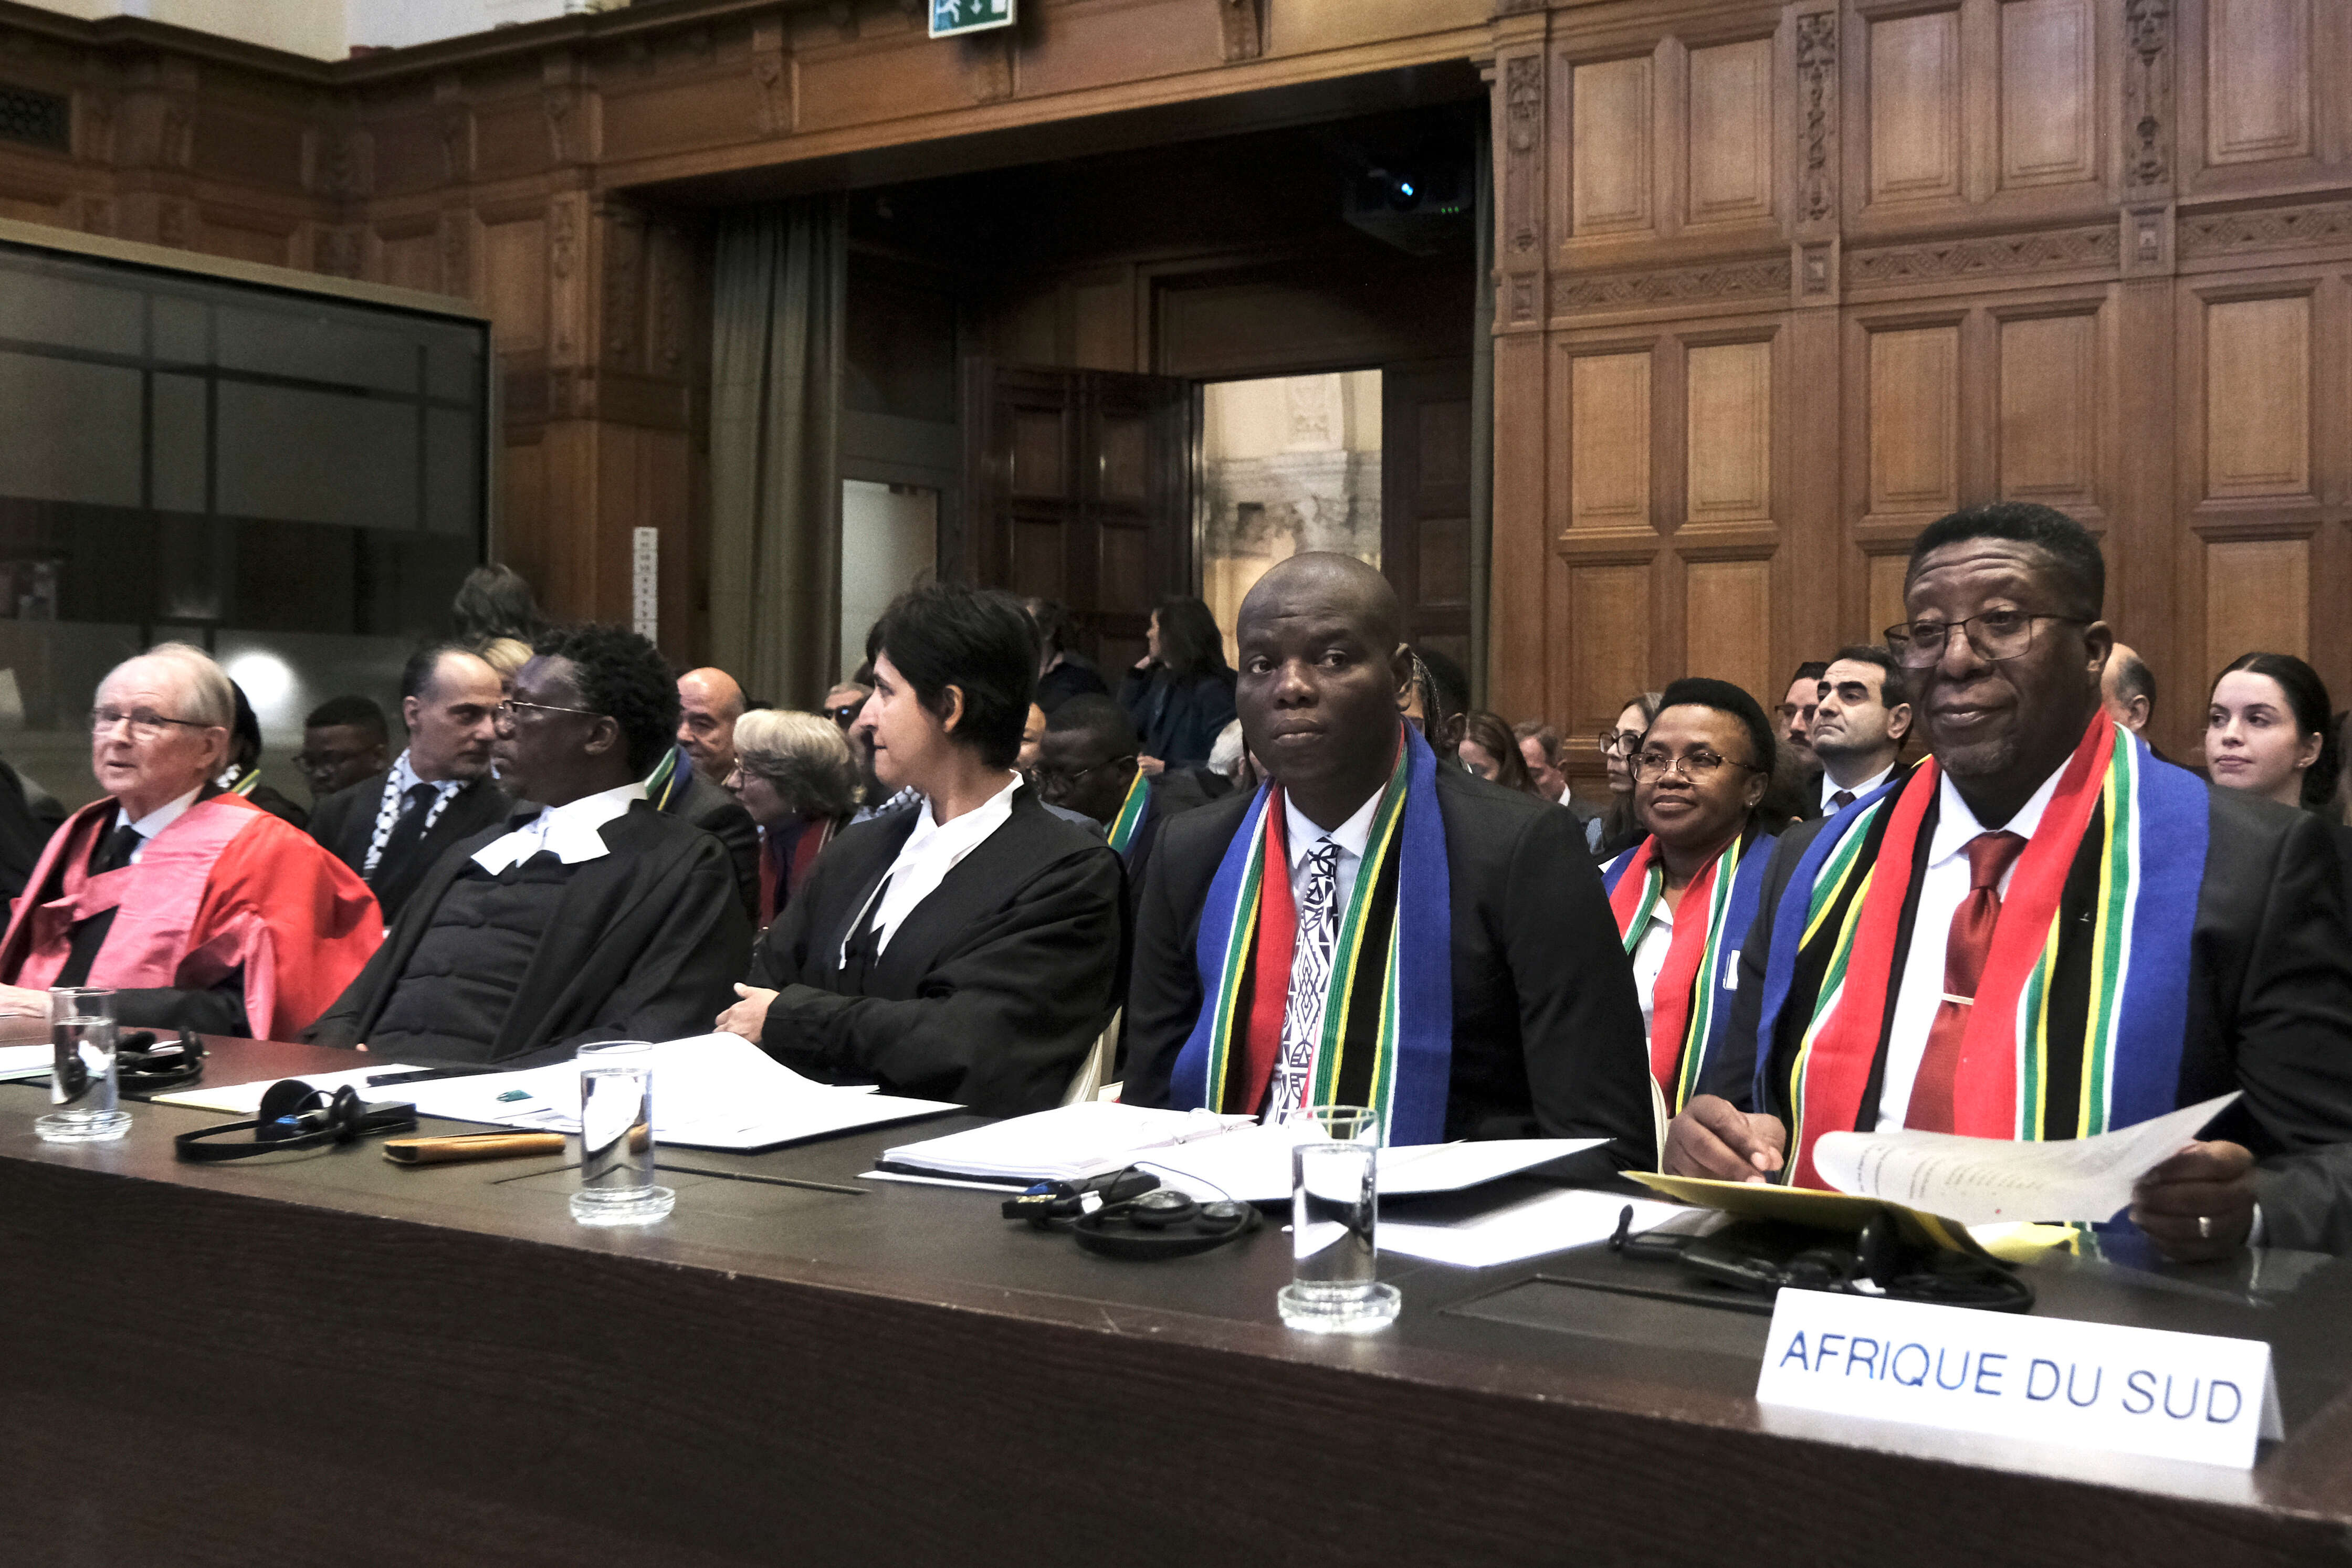 Ambassador of the Republic of South Africa to the Netherlands Vusimuzi Madonsela, right, and Minister of Justice and Correctional Services of South Africa Ronald Lamola, center, during the opening of the hearings at the International Court of Justice in The Hague, Netherlands, Thursday, Jan. 11, 2024. The United Nations' top court opens hearings Thursday into South Africa's allegation that Israel's war with Hamas amounts to genocide against Palestinians, a claim that Israel strongly denies. (AP Photo/Patric